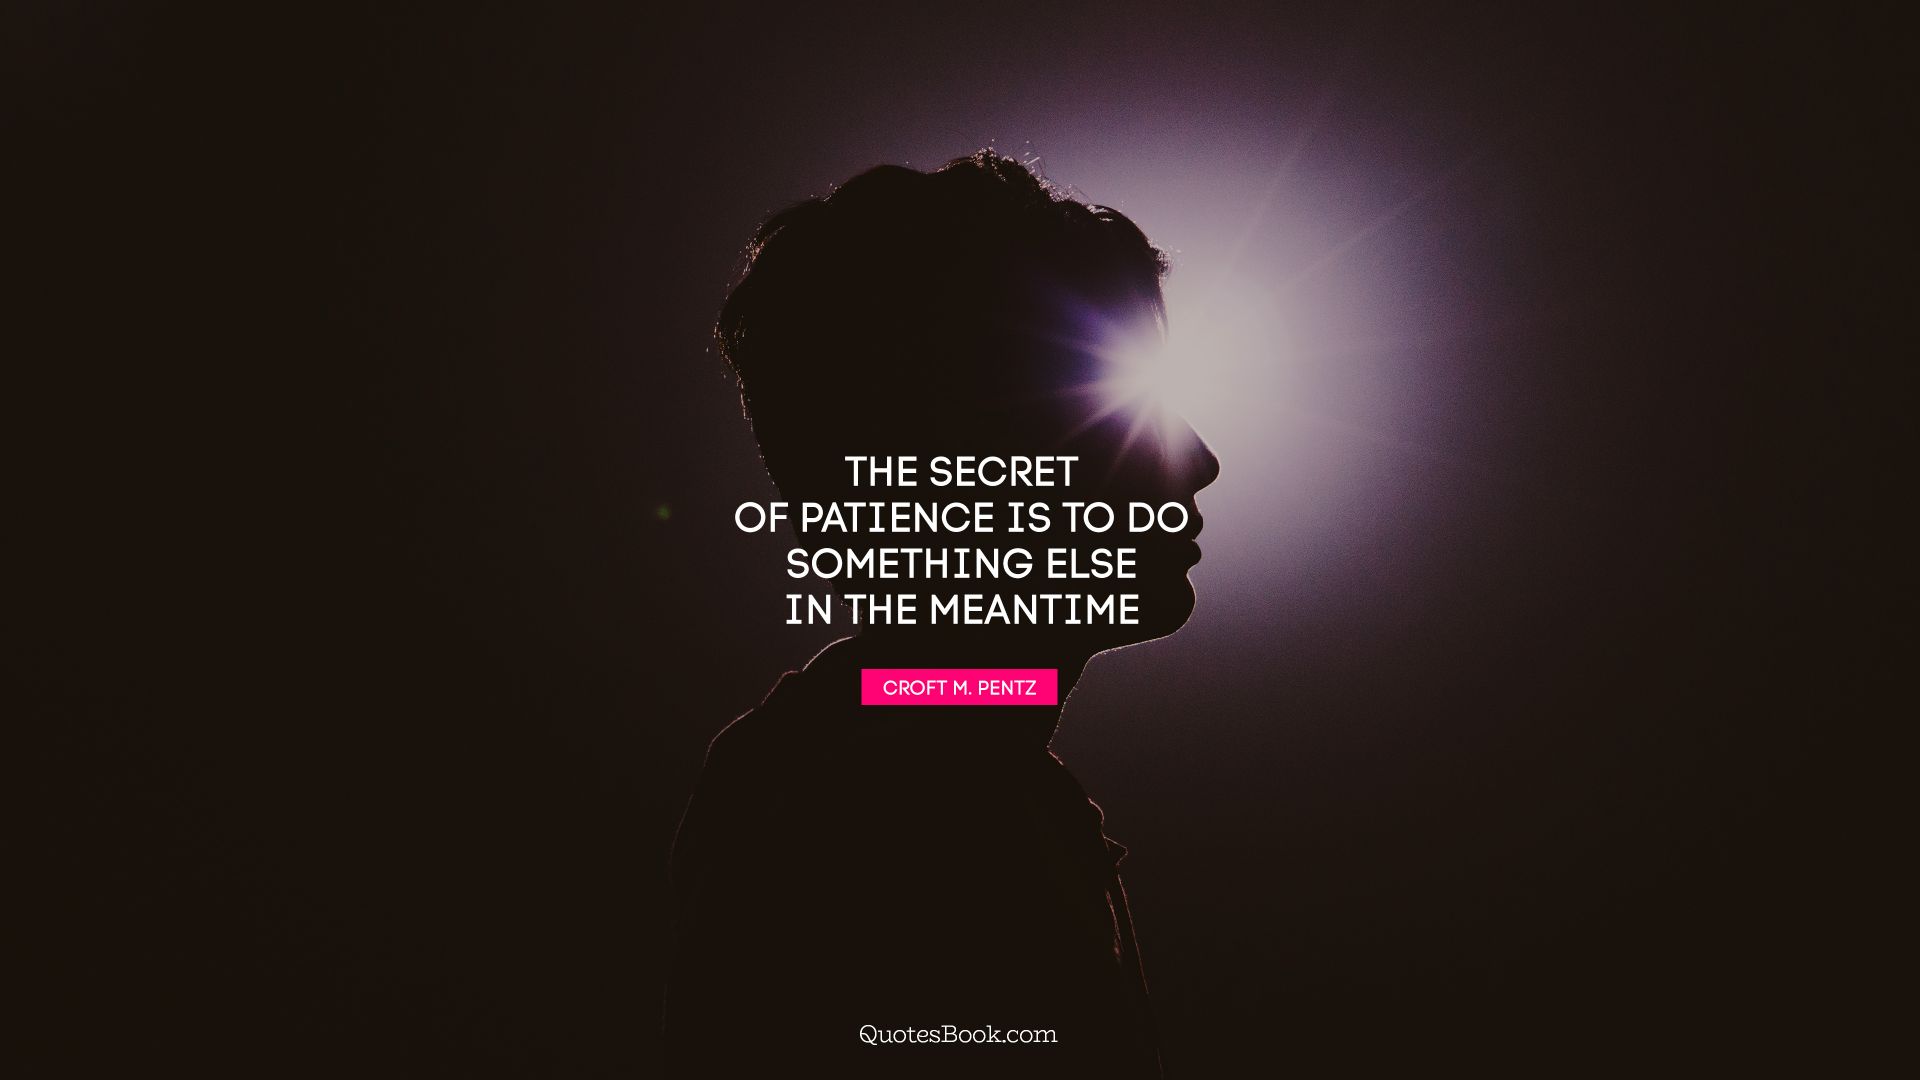 The secret of patience is to do something else in the meantime. - Quote by Croft M. Pentz